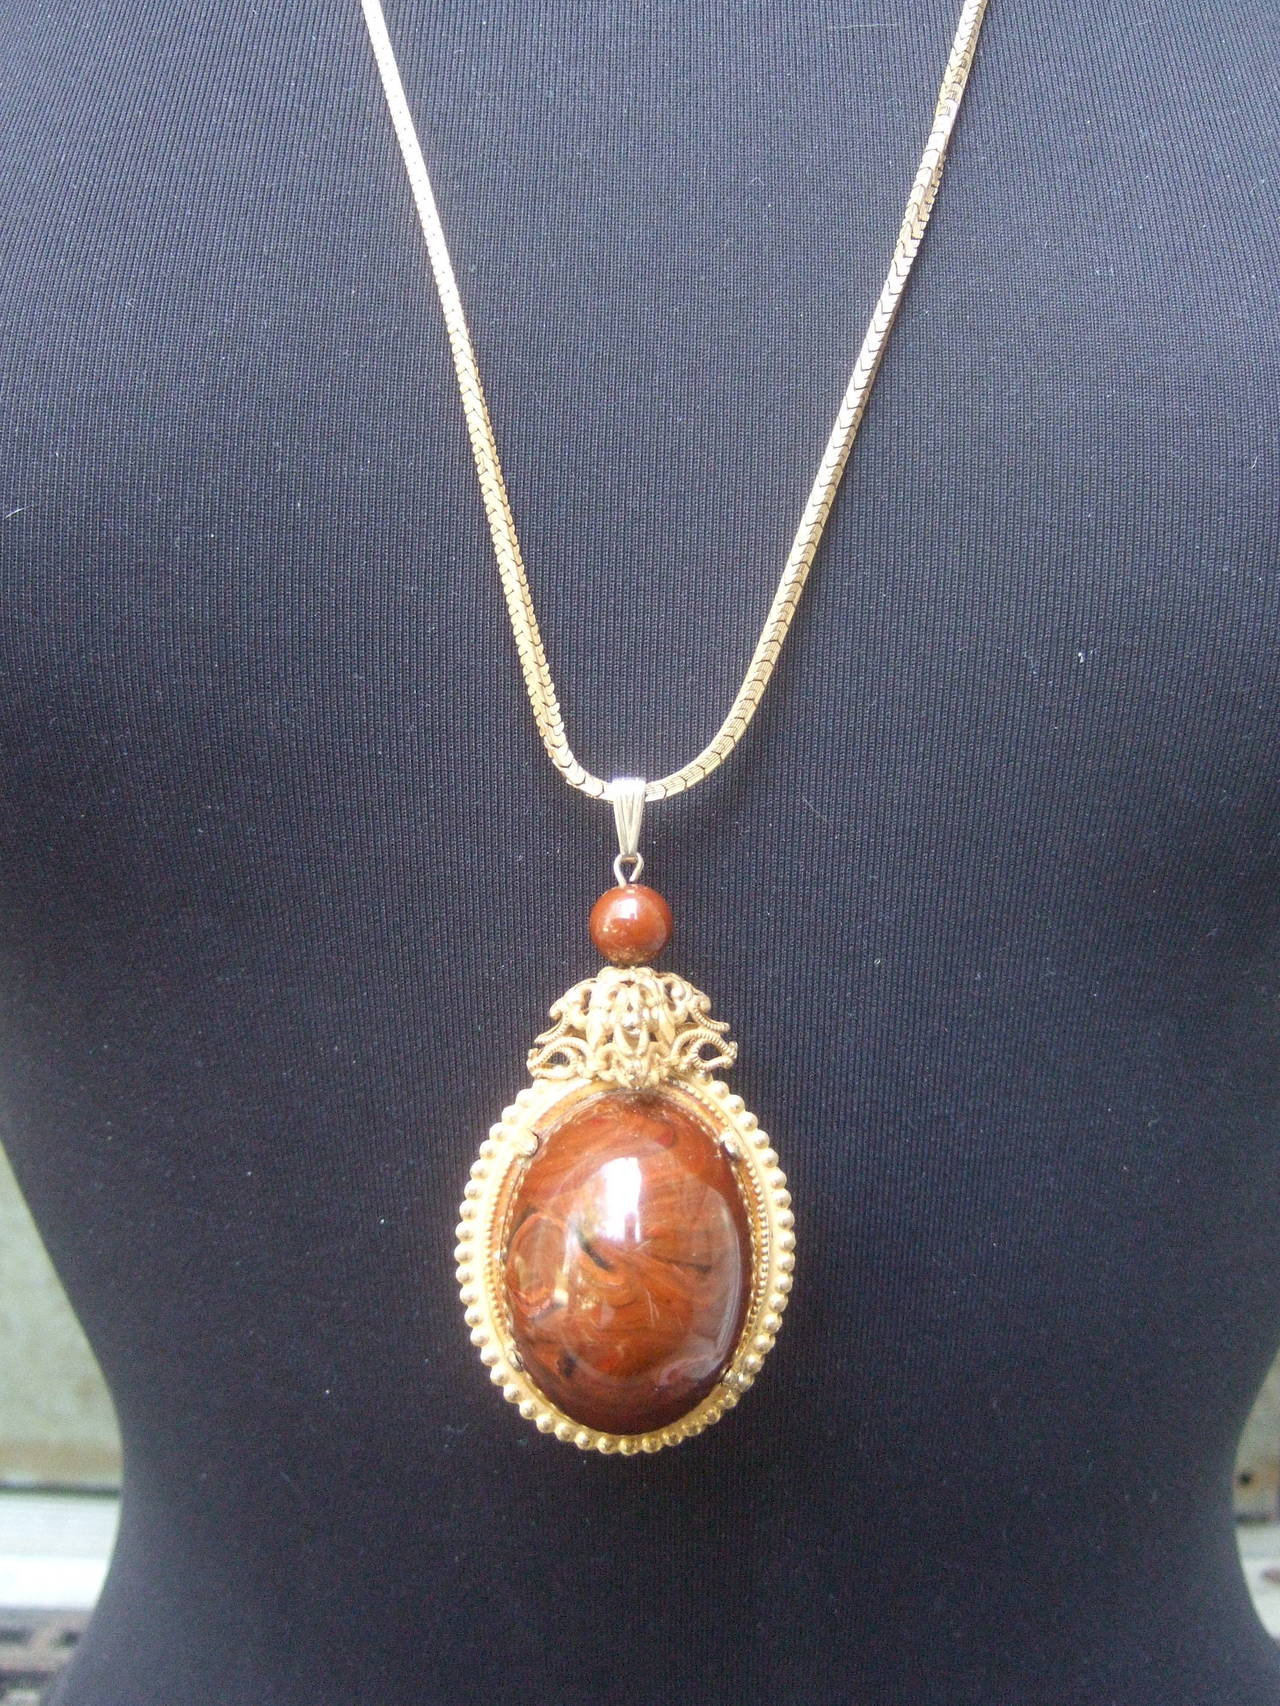 Miriam Haskell Brown lucite egg pendant necklace c 1970
The unique costume designer necklace is embellished 
with a large egg shaped pendant. The lucite pendant 
is designed with glossy brown hues with marbleized    
veining detail

The